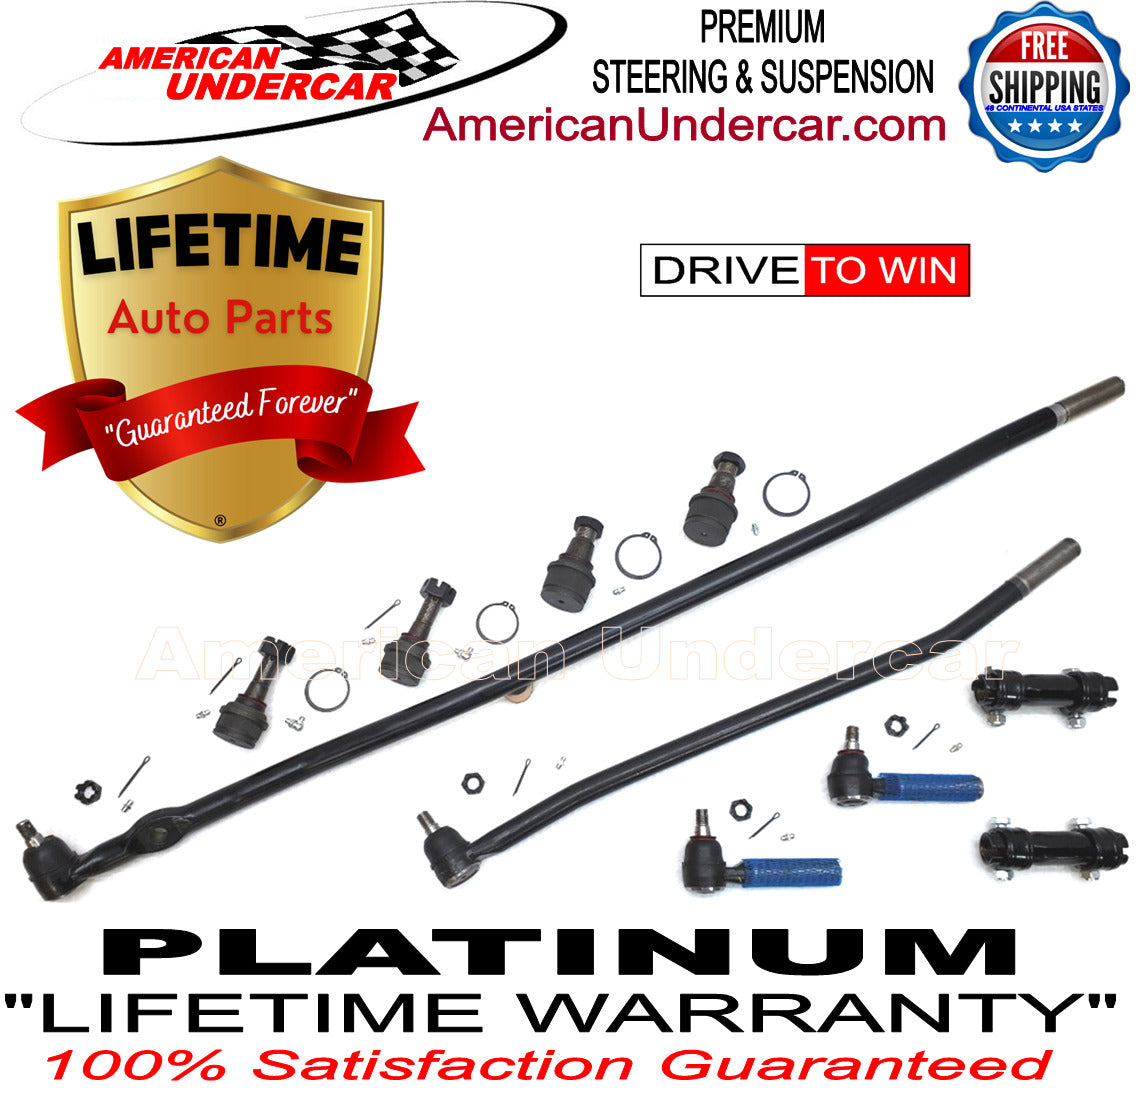 Lifetime Ball Joint Tie Rod Drag Link Sleeve Steering Kit for 1992-1997 Ford F350 4x4